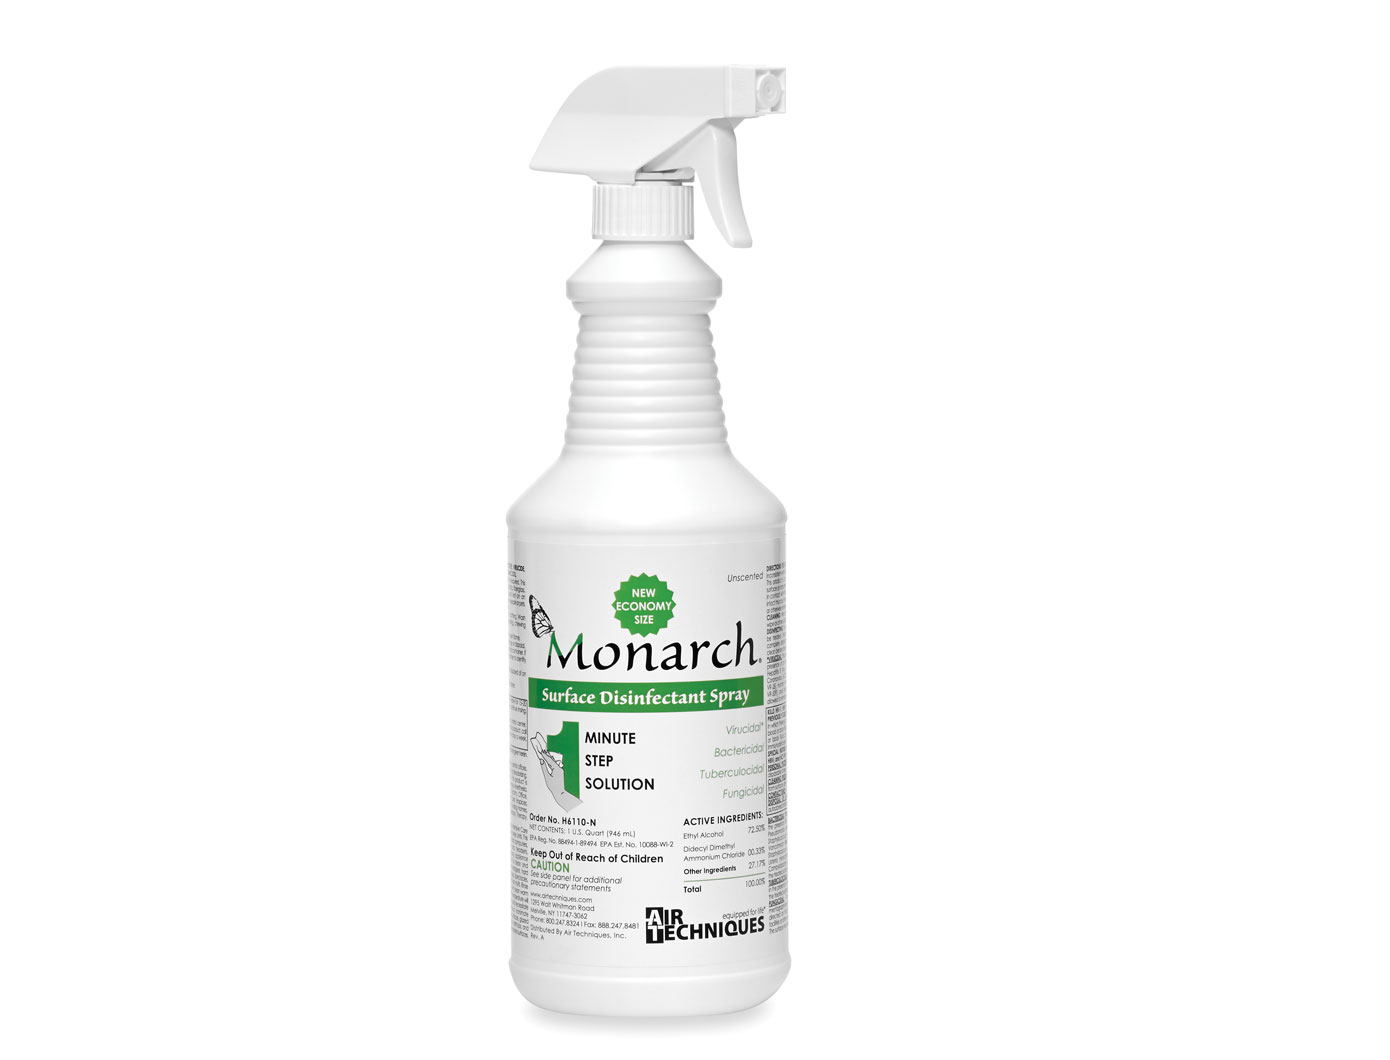 Monarch surface disinfectant spray